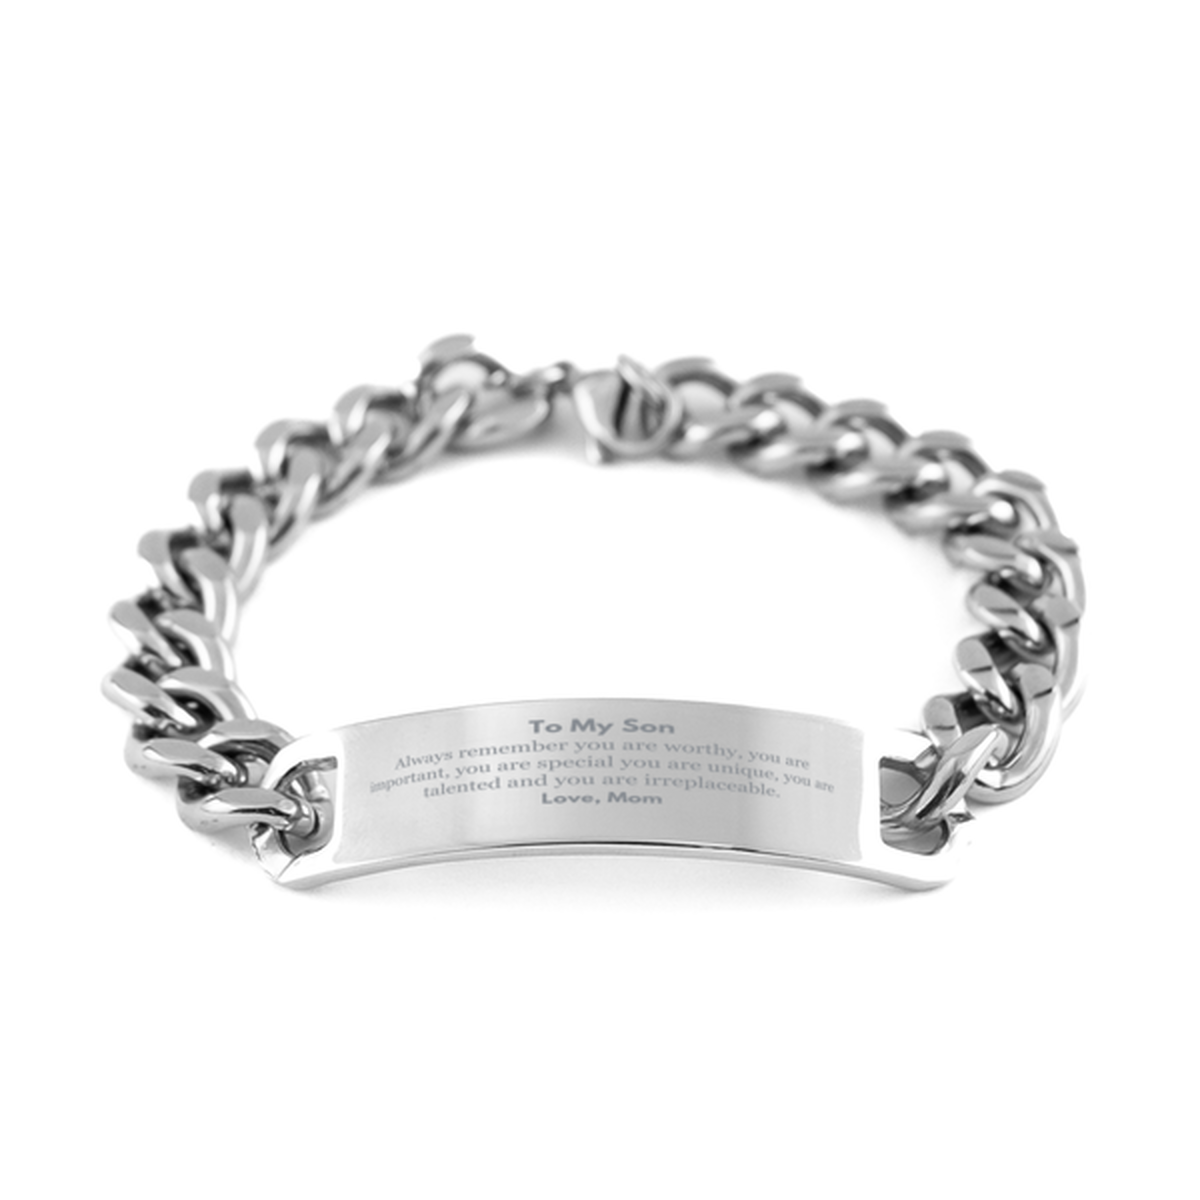 Son Birthday Gifts from Mom, Inspirational Cuban Chain Stainless Steel Bracelet for Son Christmas Graduation Gifts for Son Always remember you are worthy, you are important. Love, Mom